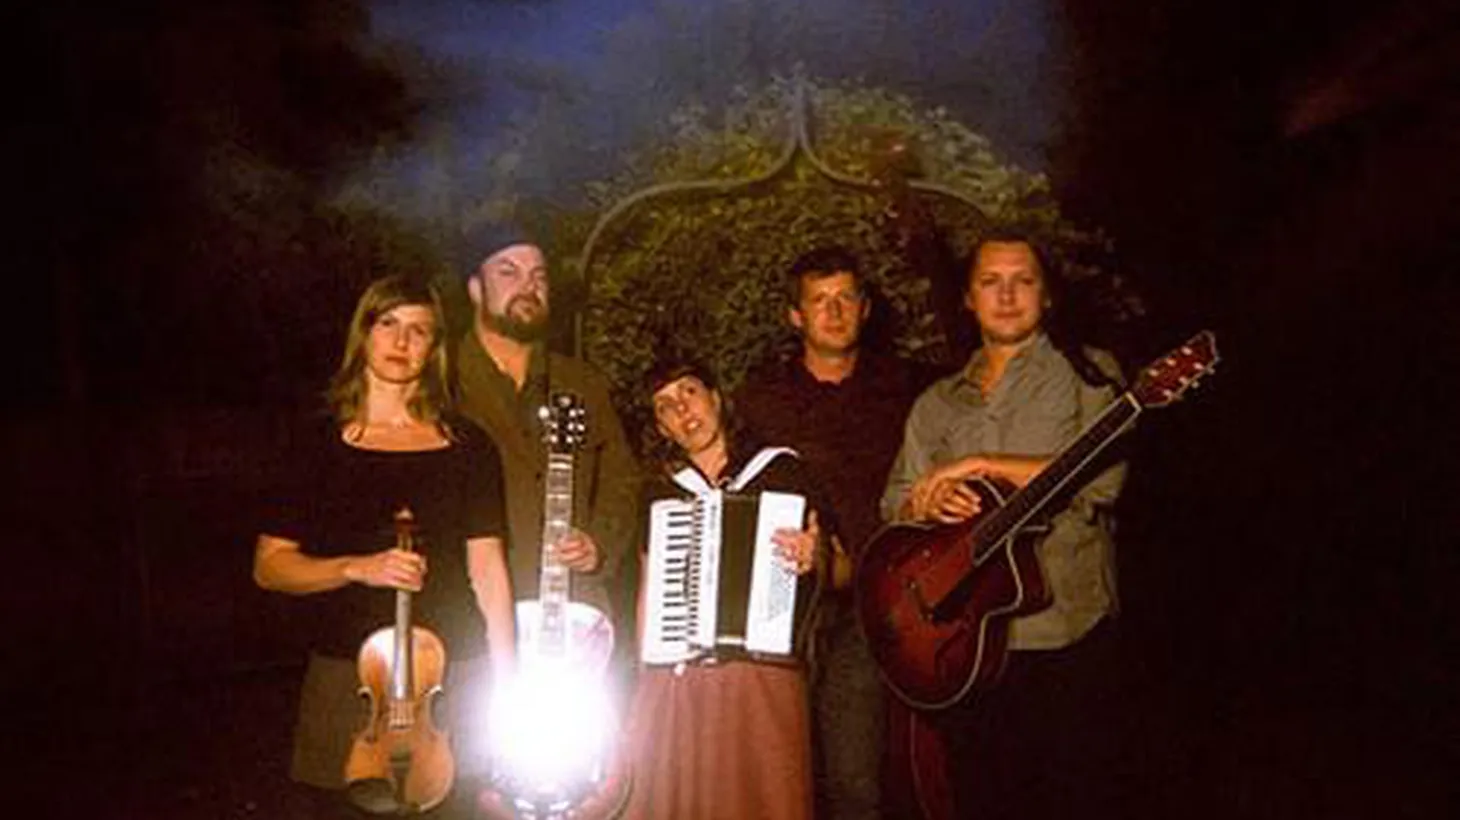 Members of The Decemberists have teamed up on a new project playing instrumental string band music. Expect to hear a lot of dobro, accordian and more when Black Prairie bring their unplugged sound to Morning Becomes Eclectic at 11:15am.